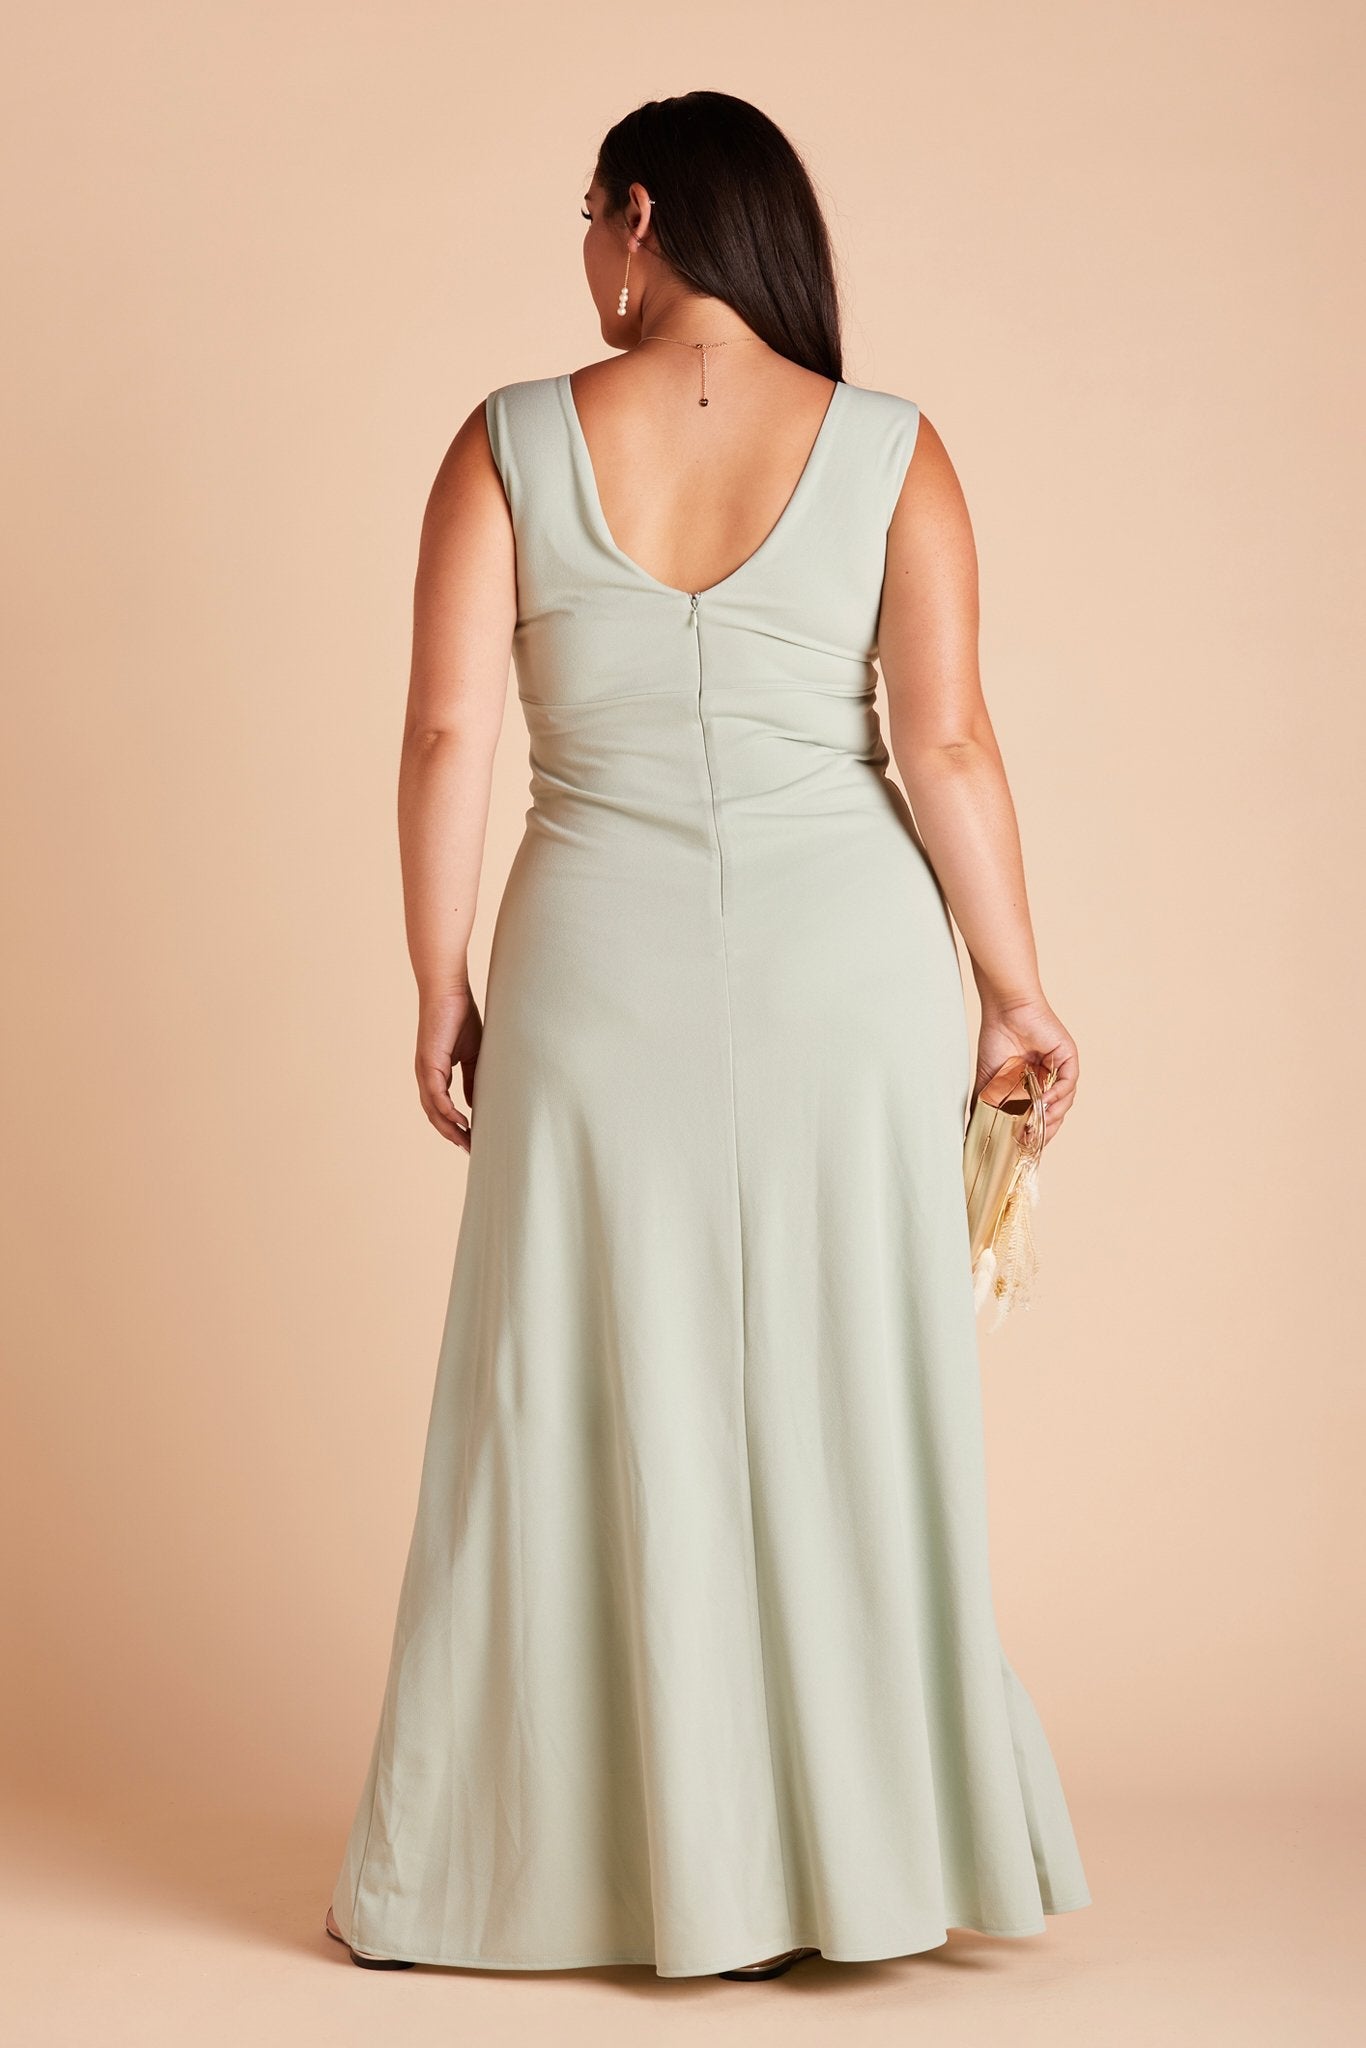 Shamin plus size bridesmaid dress in sage green crepe by Birdy Grey, back view